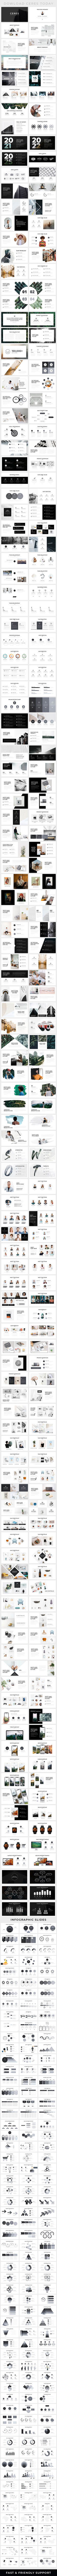 Ceres - Minimal Powerpoint Template - 1